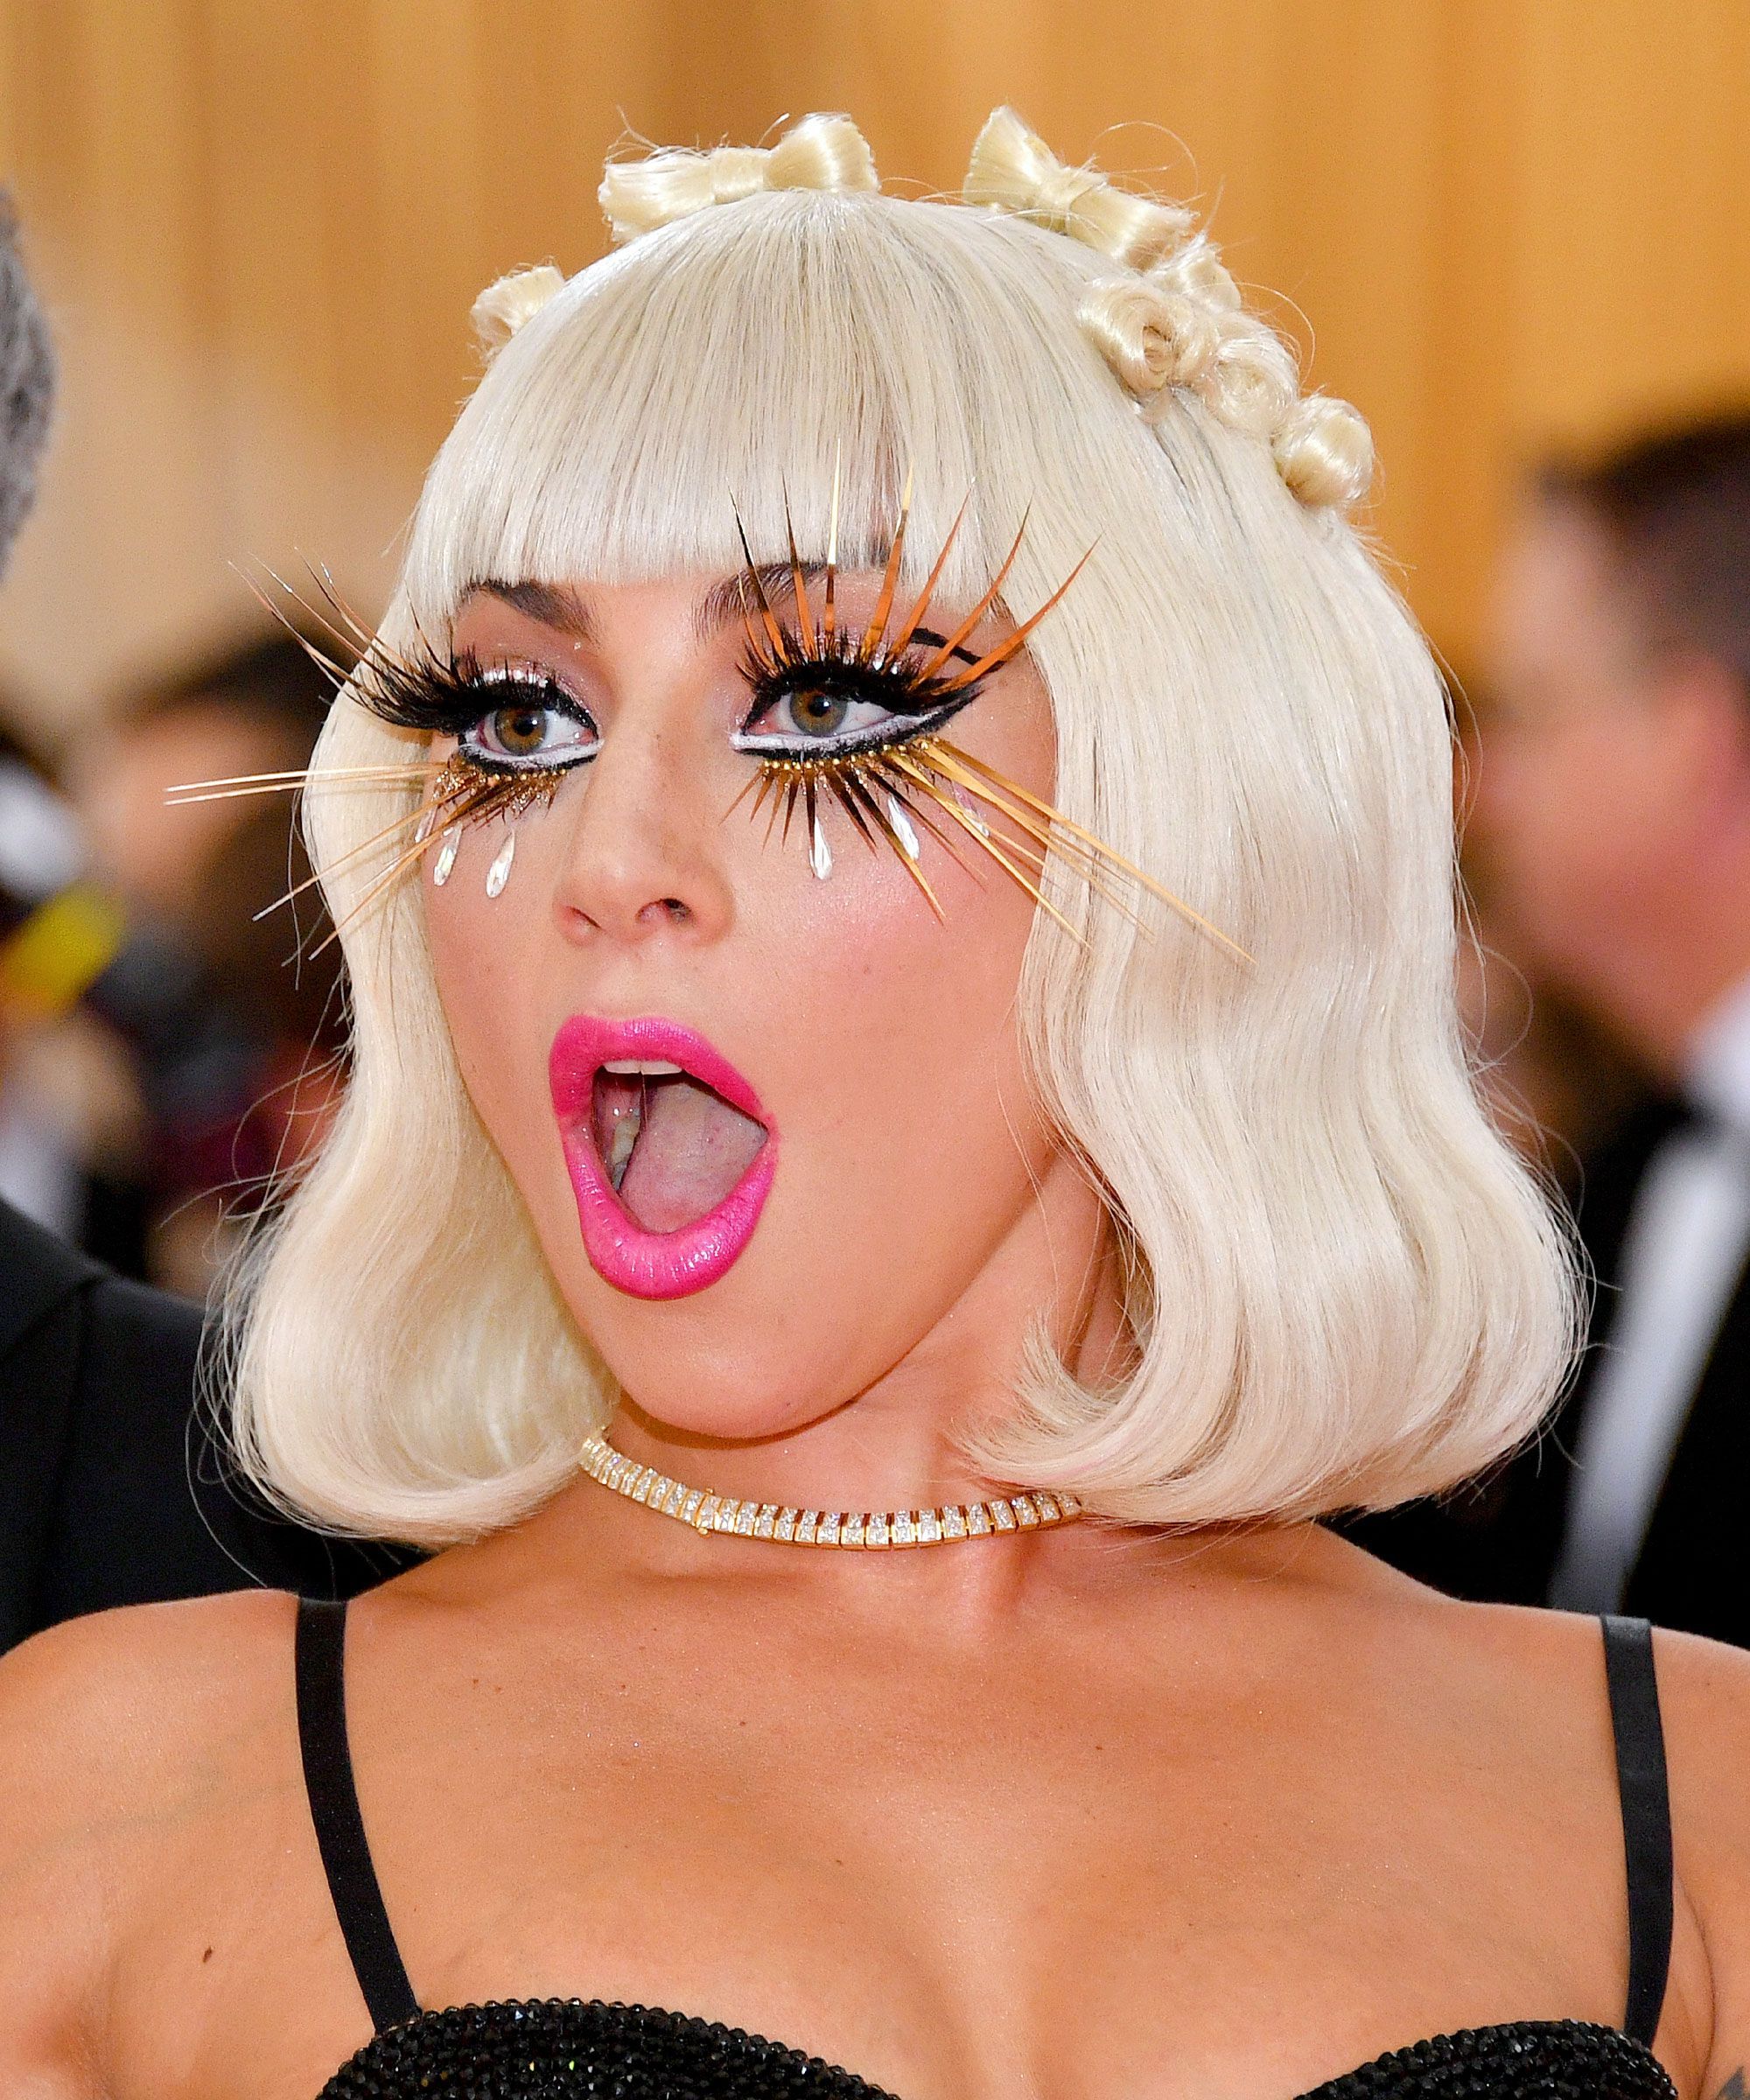 Lady Gaga Arrived At The Met Gala With The Wildest Fake Lashes We’ve Ever Seen